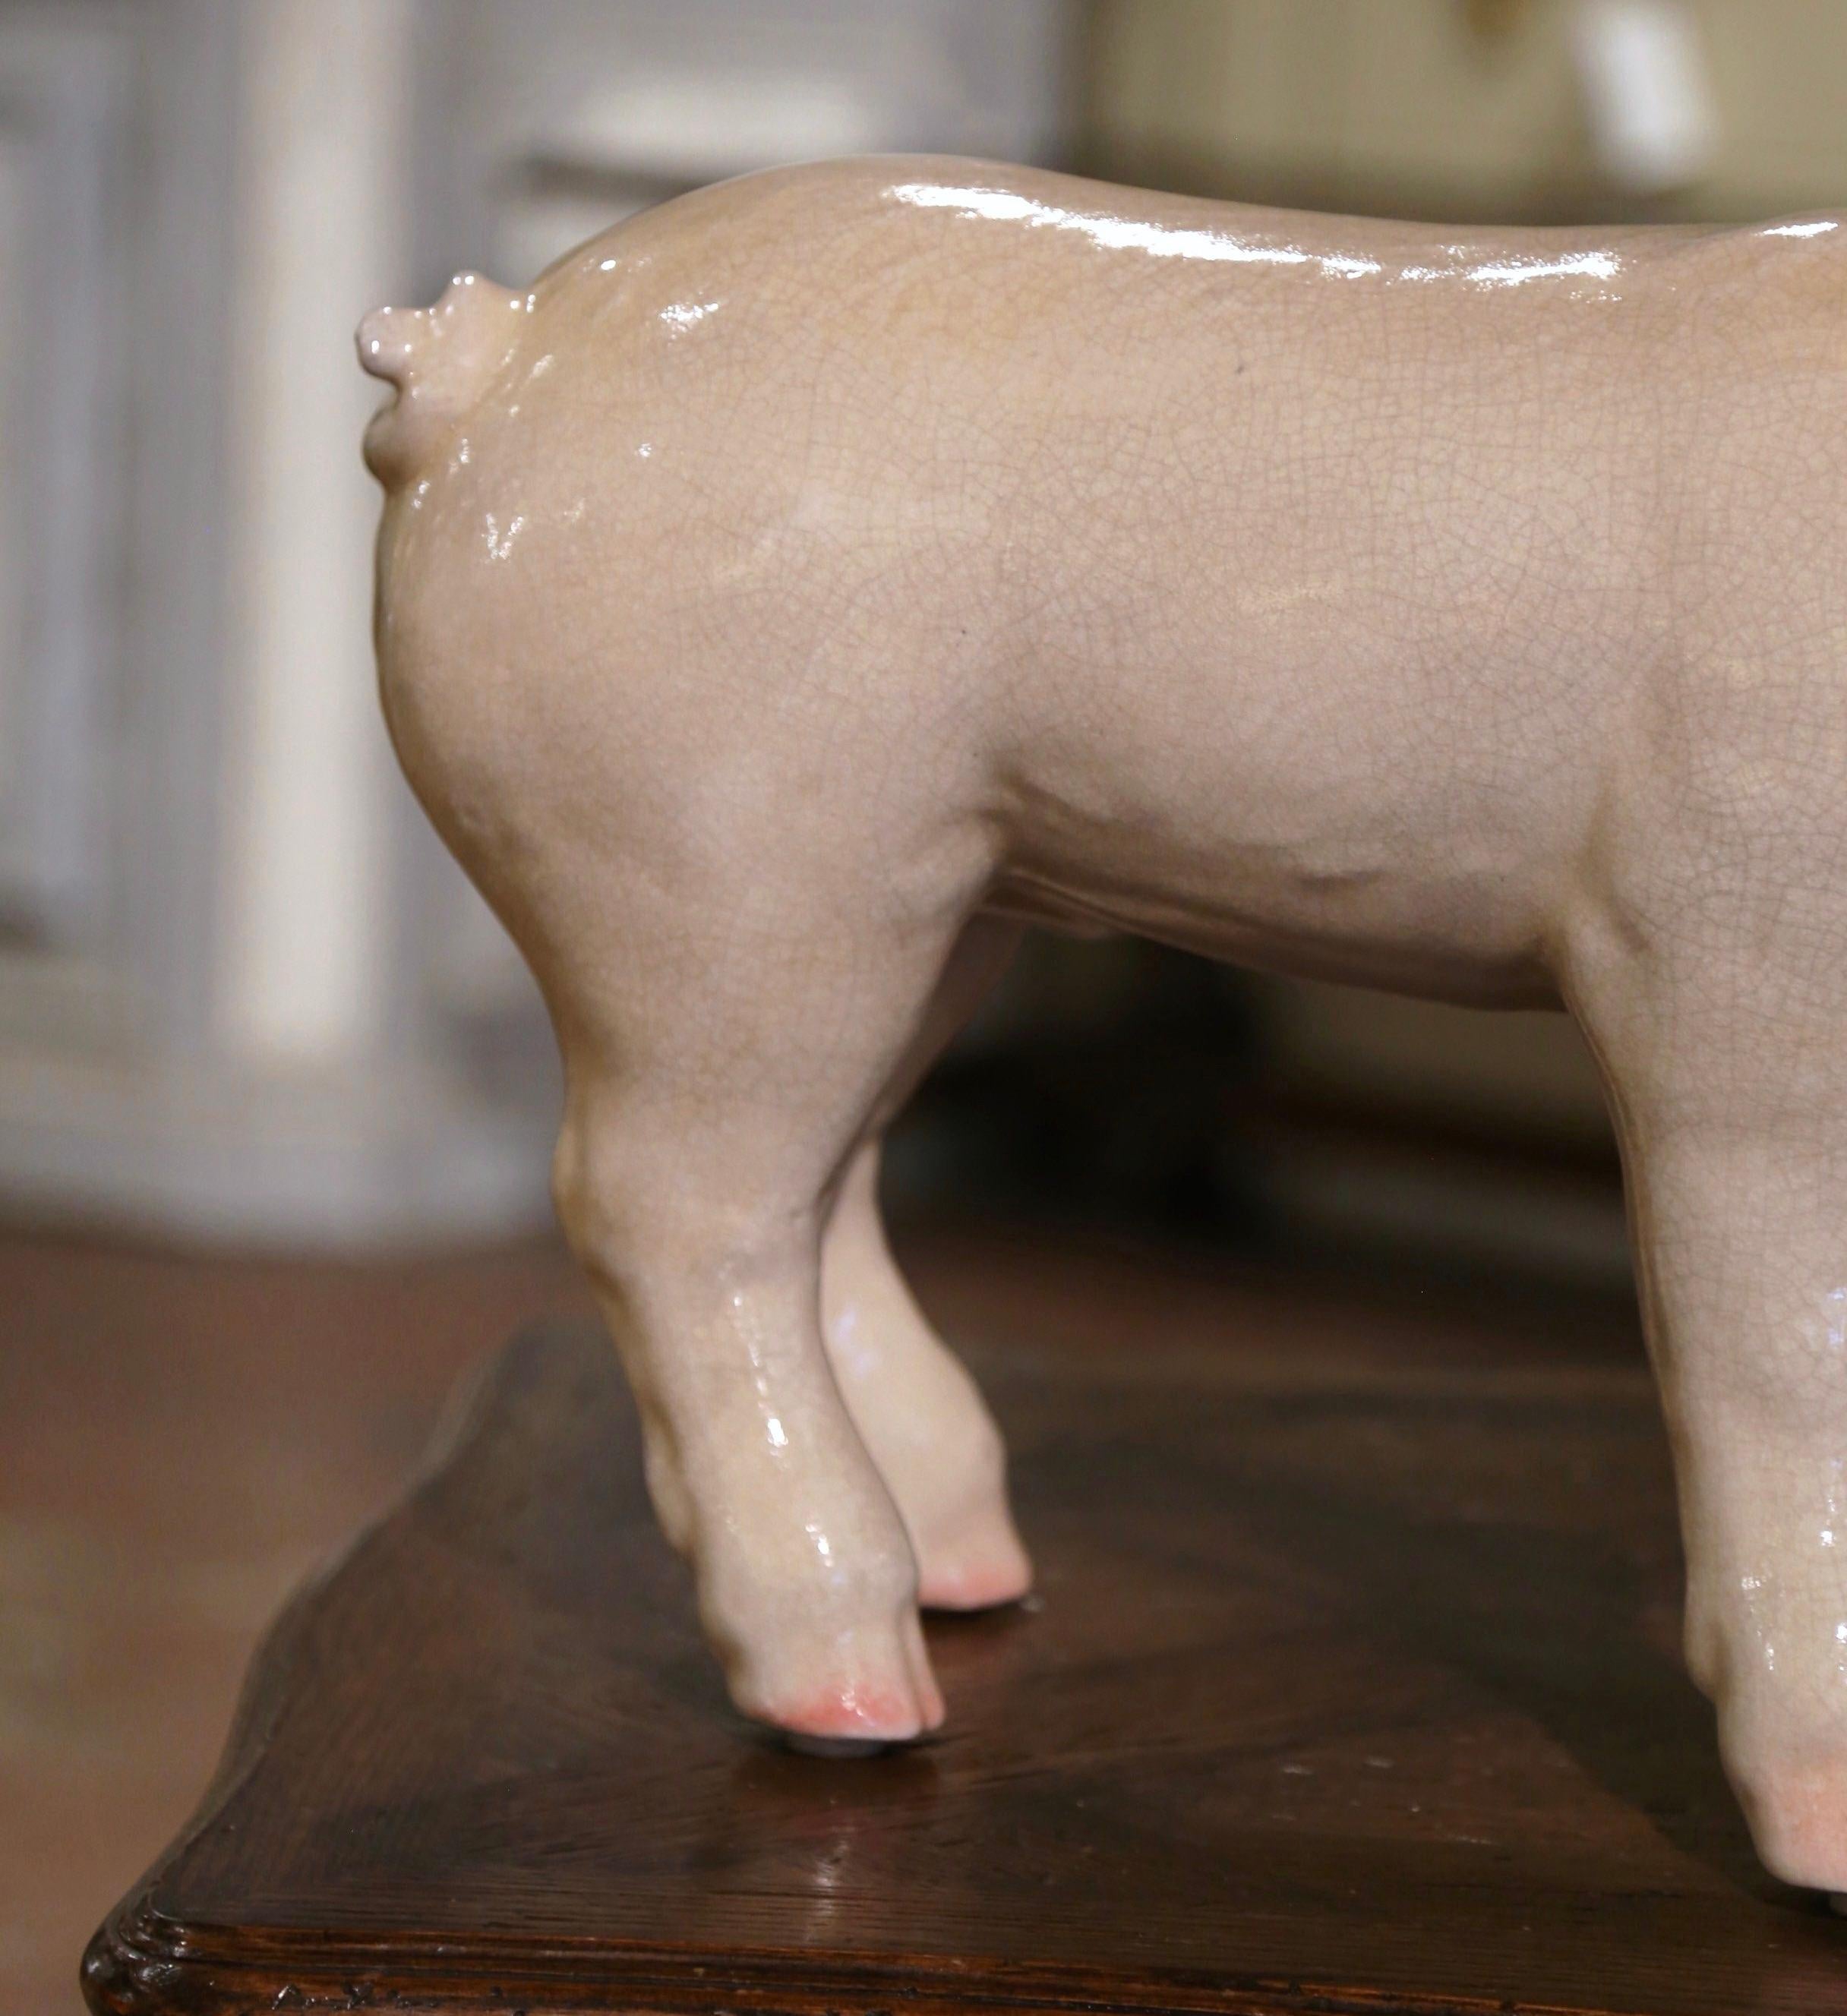 American Late 20th Century Crackled Ceramic Pig Sculpture Attributed to Townsend